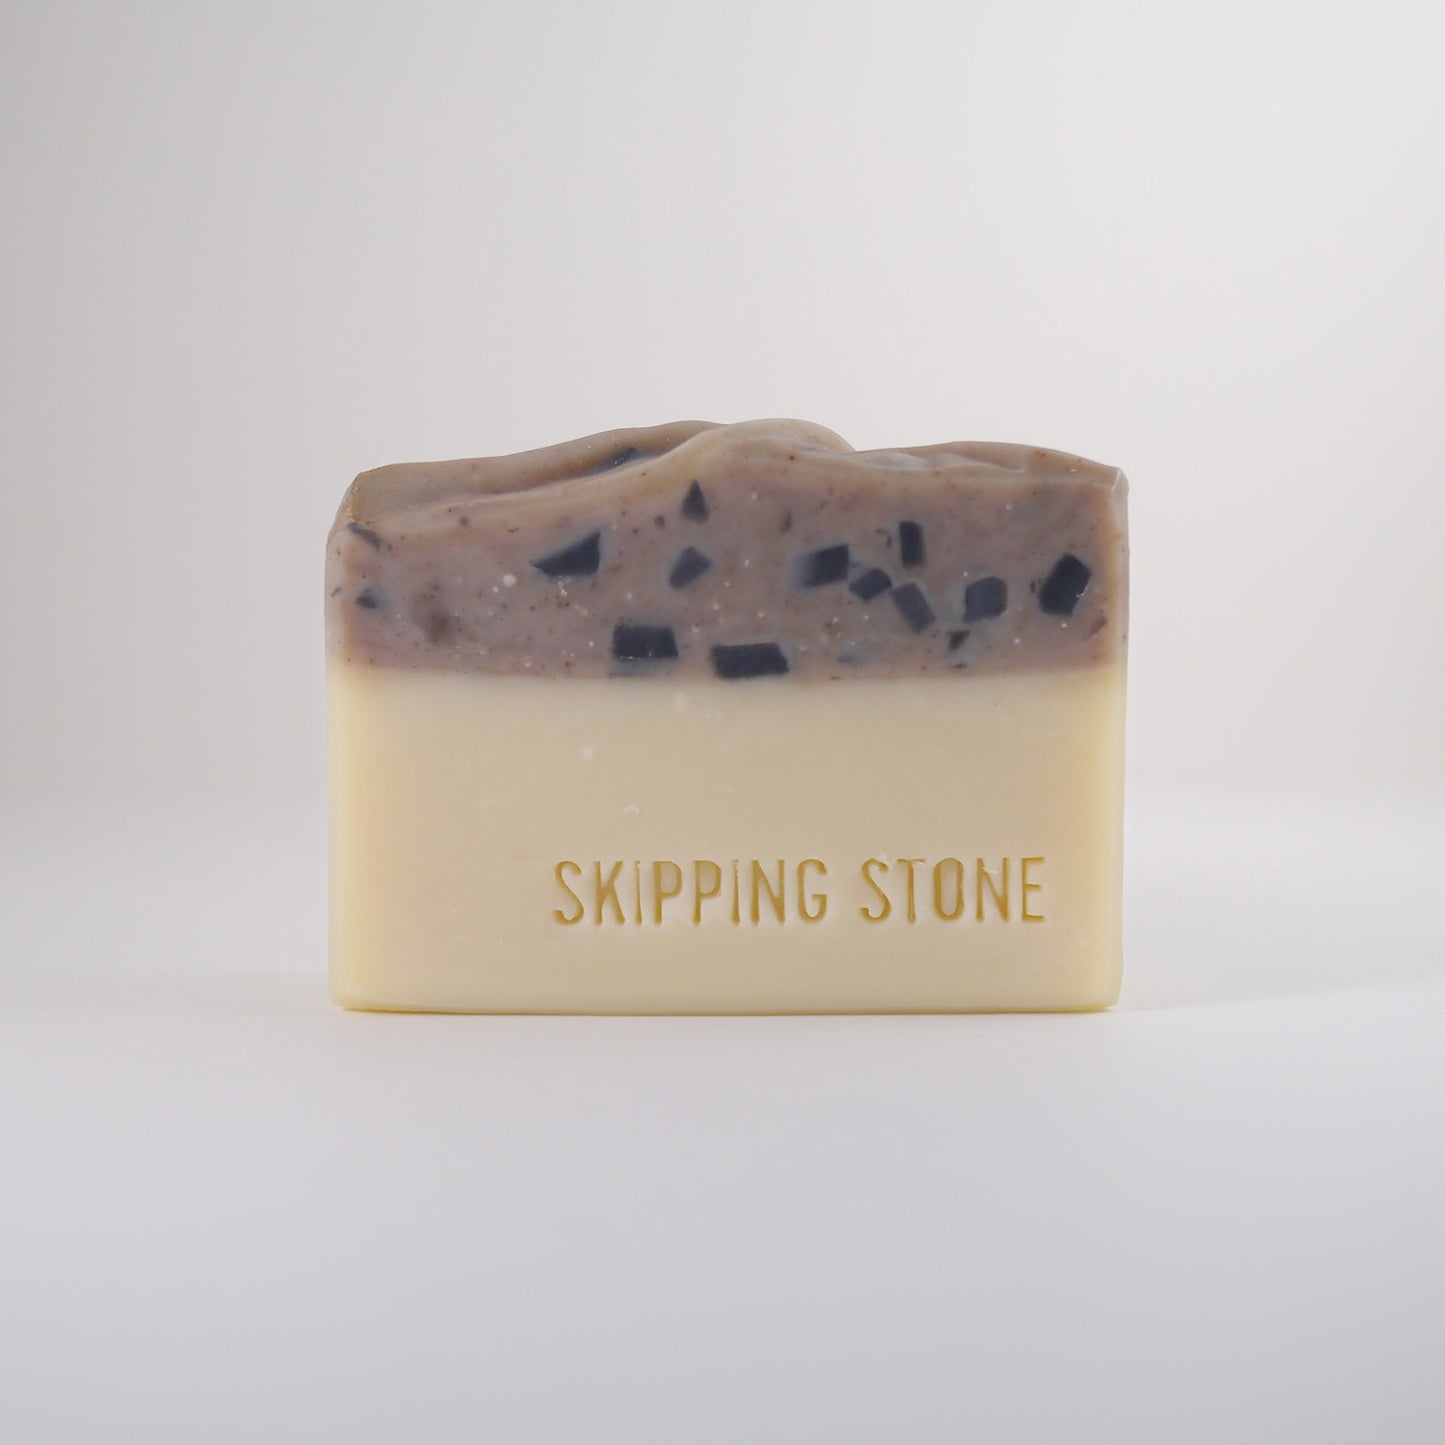 Skipping Stone Soap The Junction Body + Face Soap